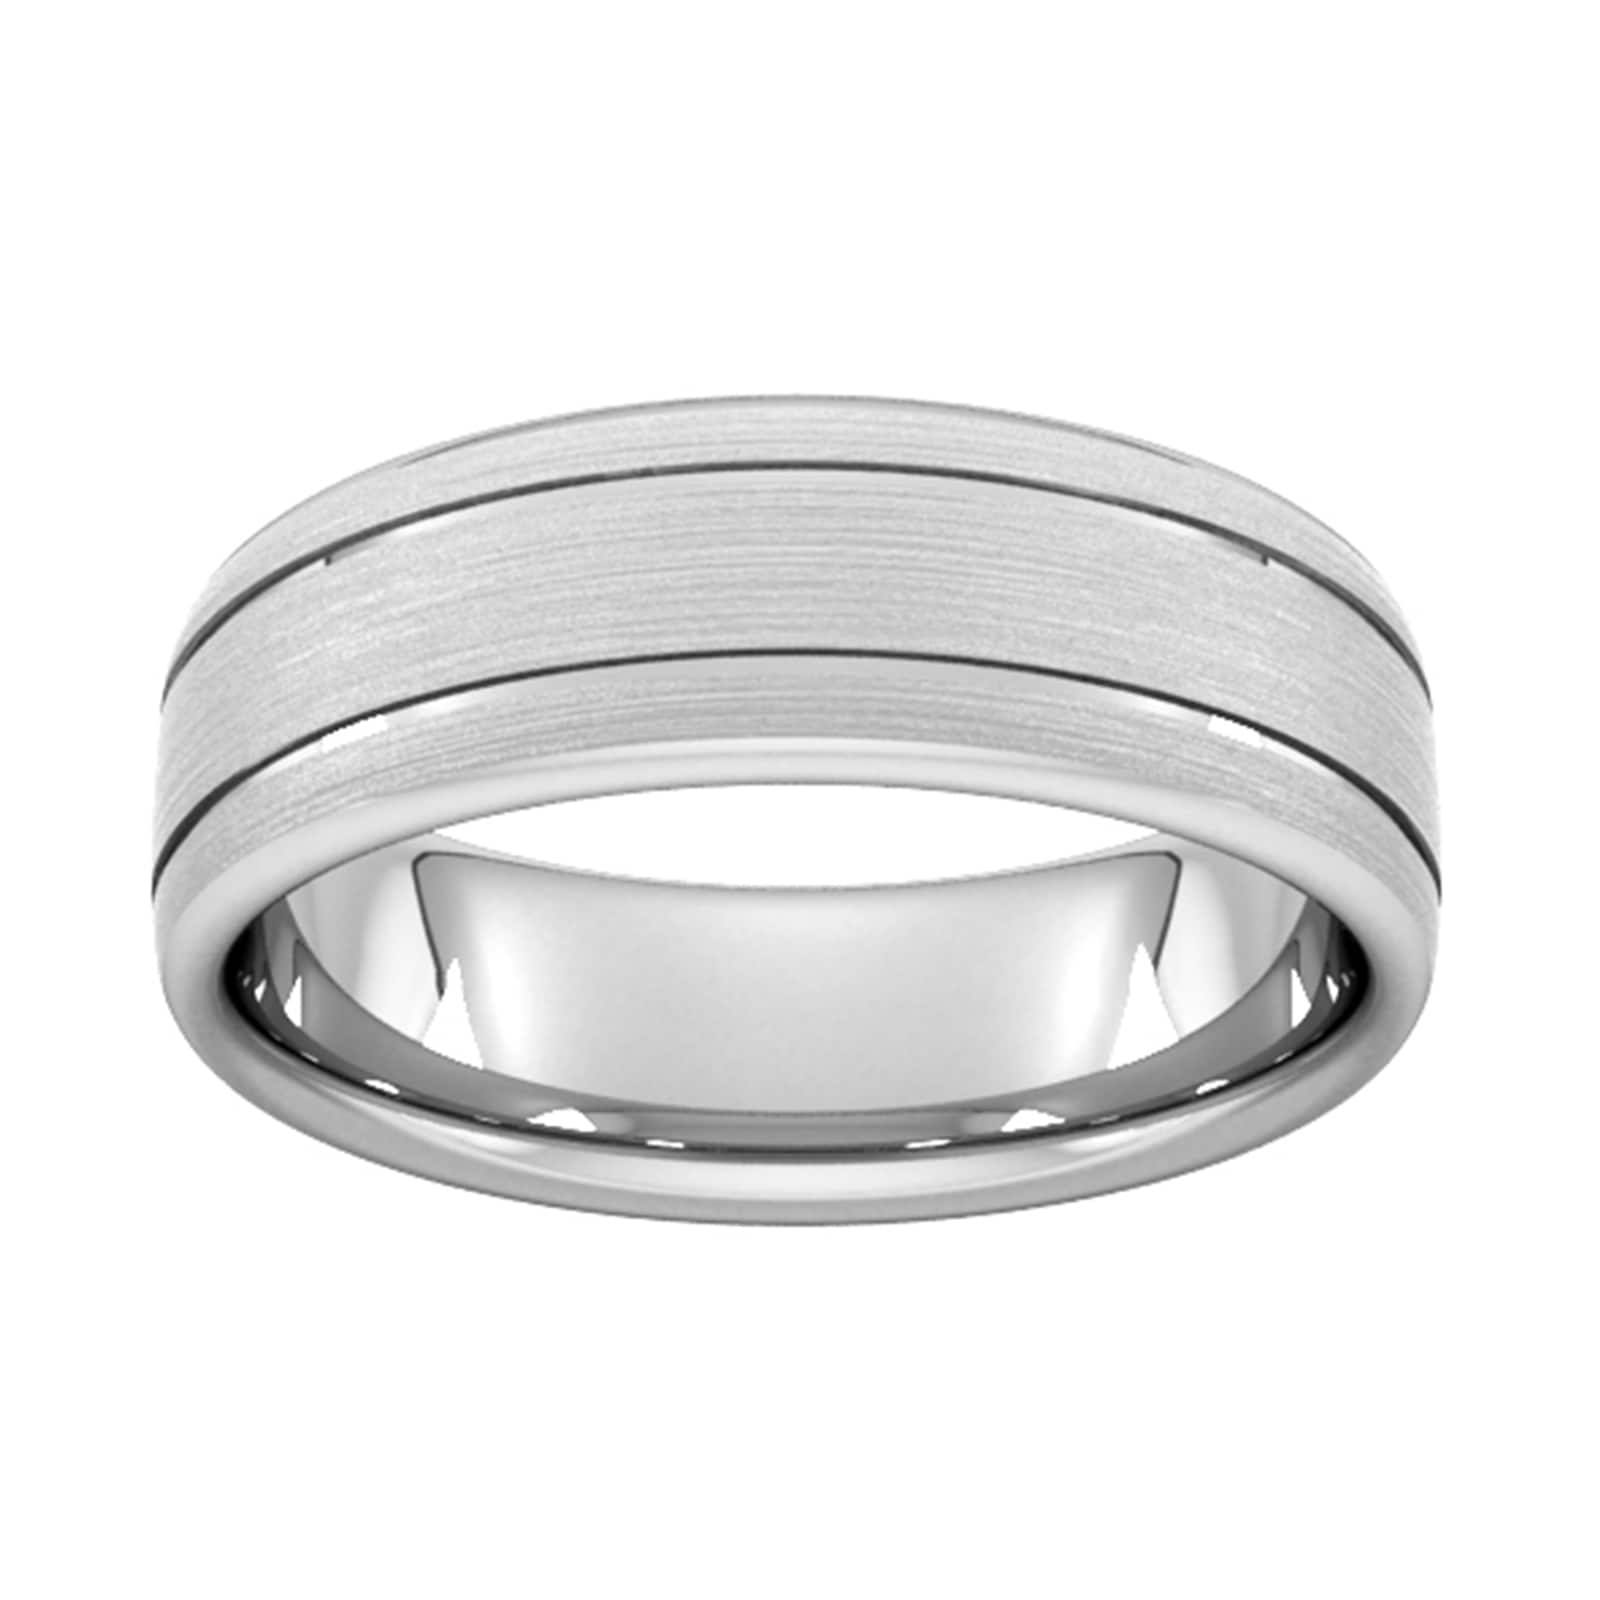 7mm Traditional Court Heavy Matt Finish With Double Grooves Wedding Ring In 9 Carat White Gold - Ring Size T